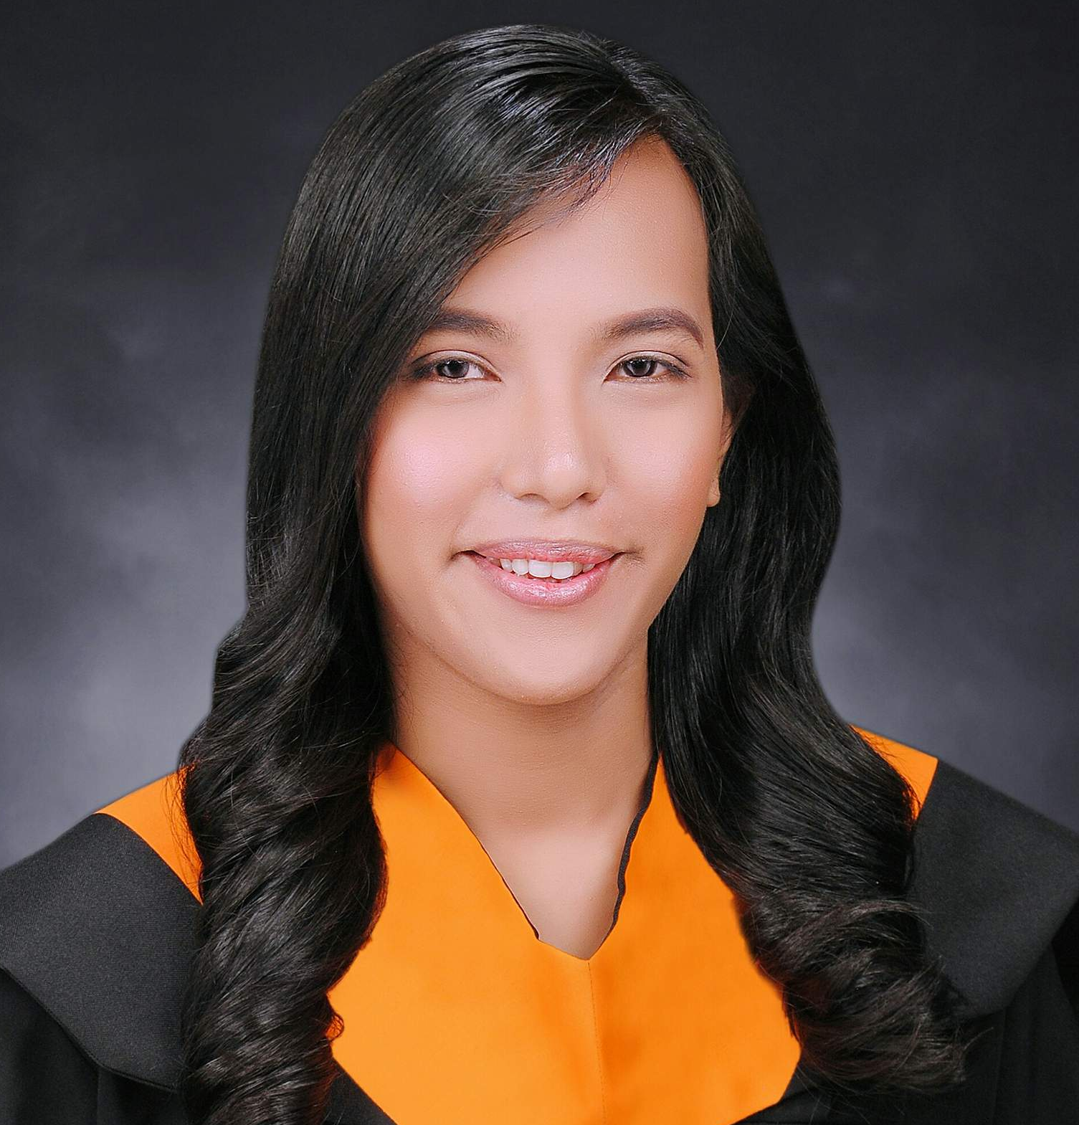 Engr. Melody C. Lupo, CIE